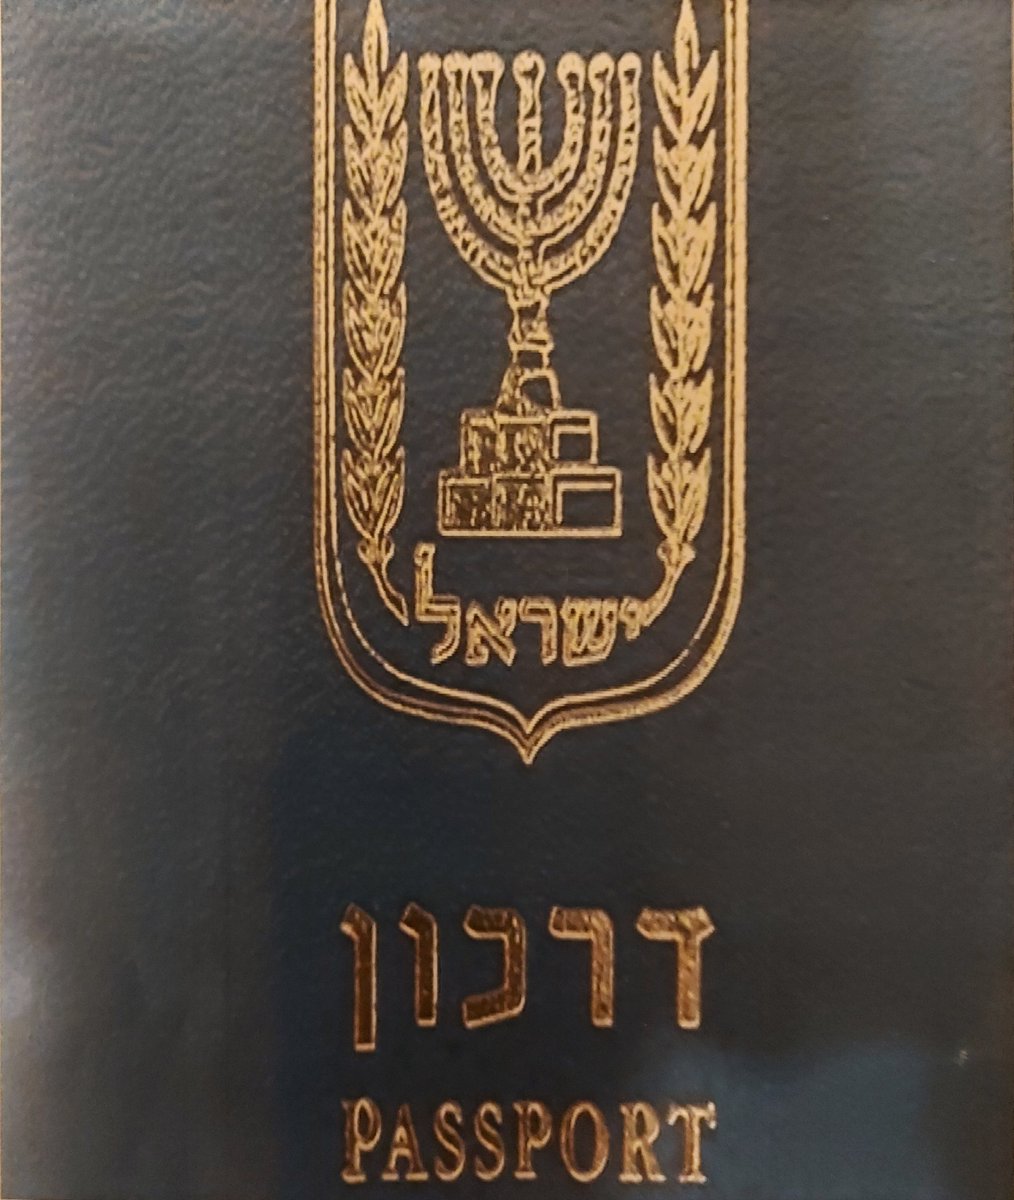 concerning Iranian service agents that were arrested in South America and who had in their possession original Israel passports. These passports were from the series that was printed in Serbia.  https://www.srbijadanas.net/srdjan-nogo-ekskluzivno-o-hapsenju-iranaca-kojima-je-vucic-stampao-izraelske-pasose-video/